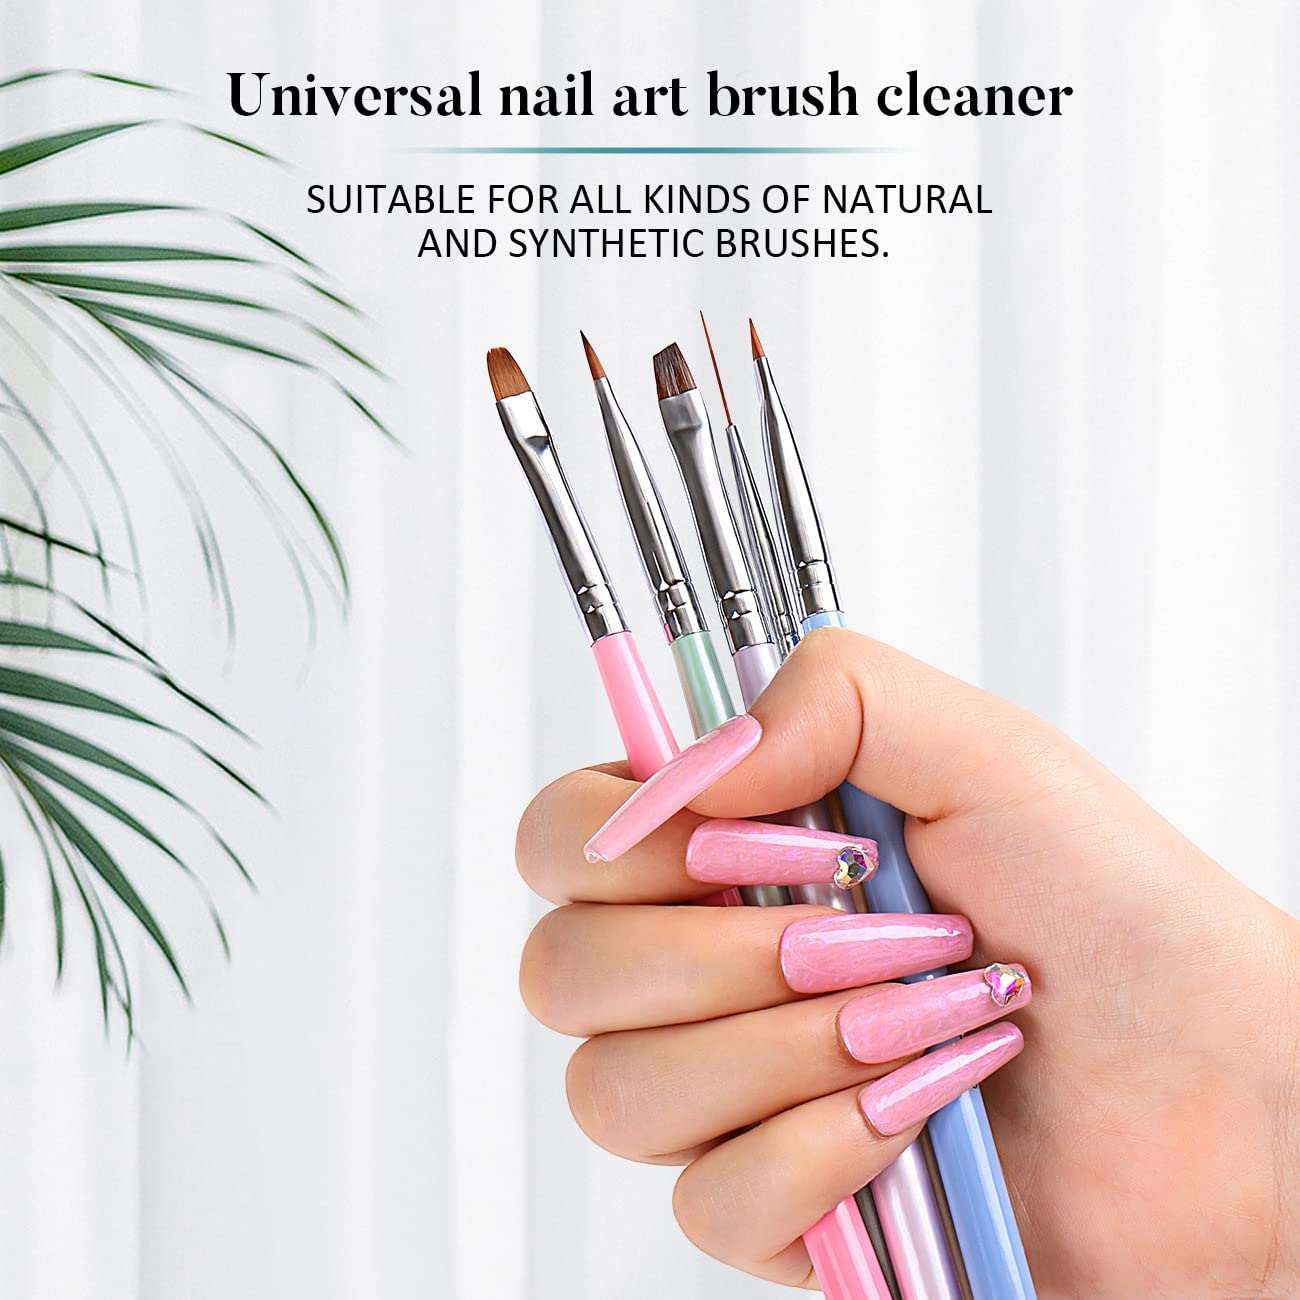 How to clean your acrylic nail brushes and keep them from getting